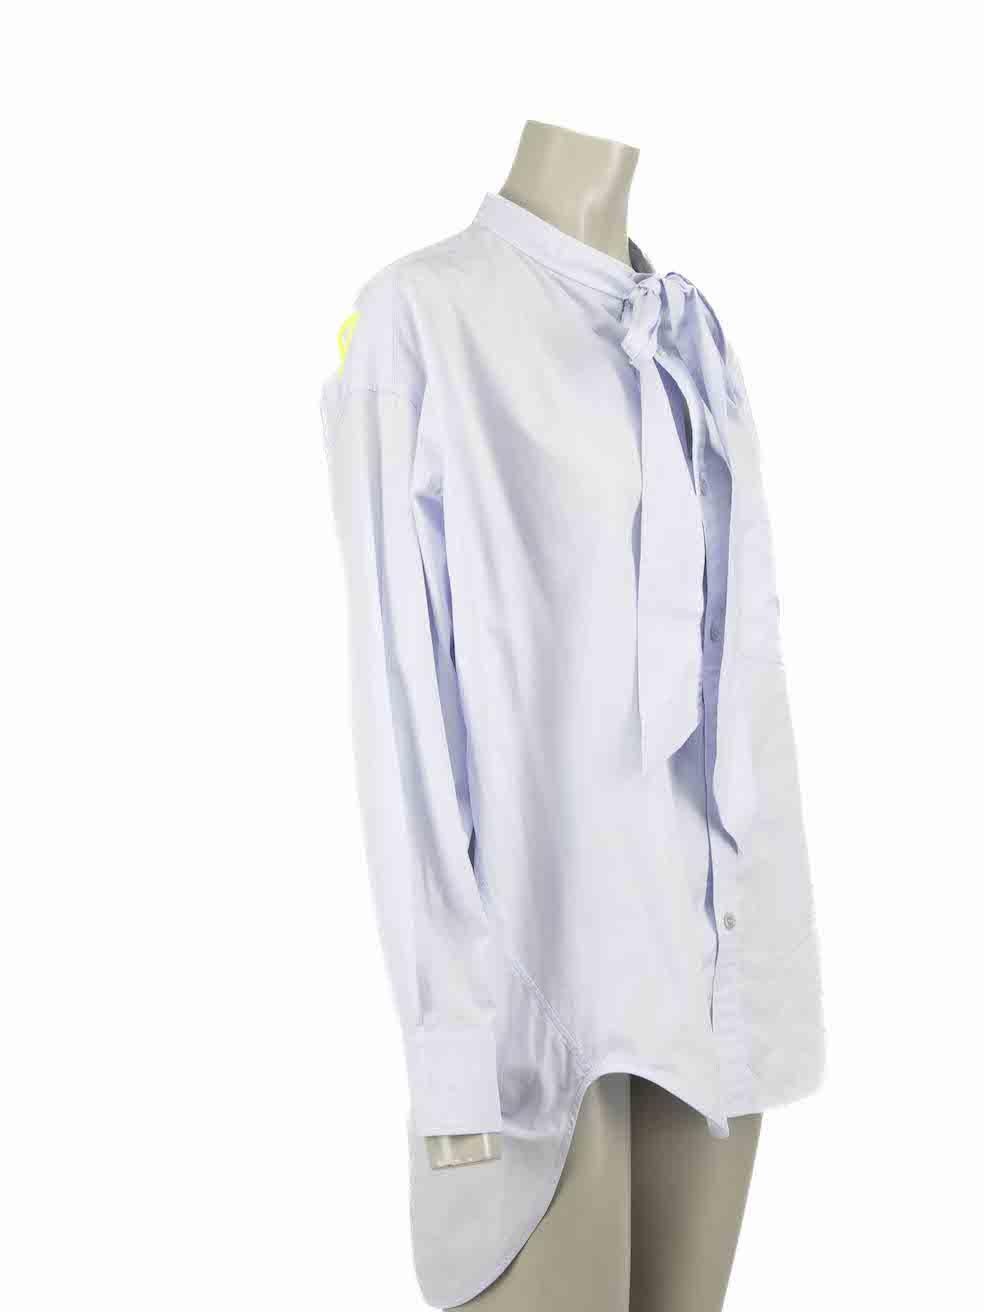 CONDITION is Very good. Minimal wear to shirt is evident. Minimal wear to the left sleeve with small mark on this used Balenciaga designer resale item.

Details
Blue
Cotton
Shirt
Button up fastening
Buttoned cuffs
Oversized fit
Neck tie detail
Back